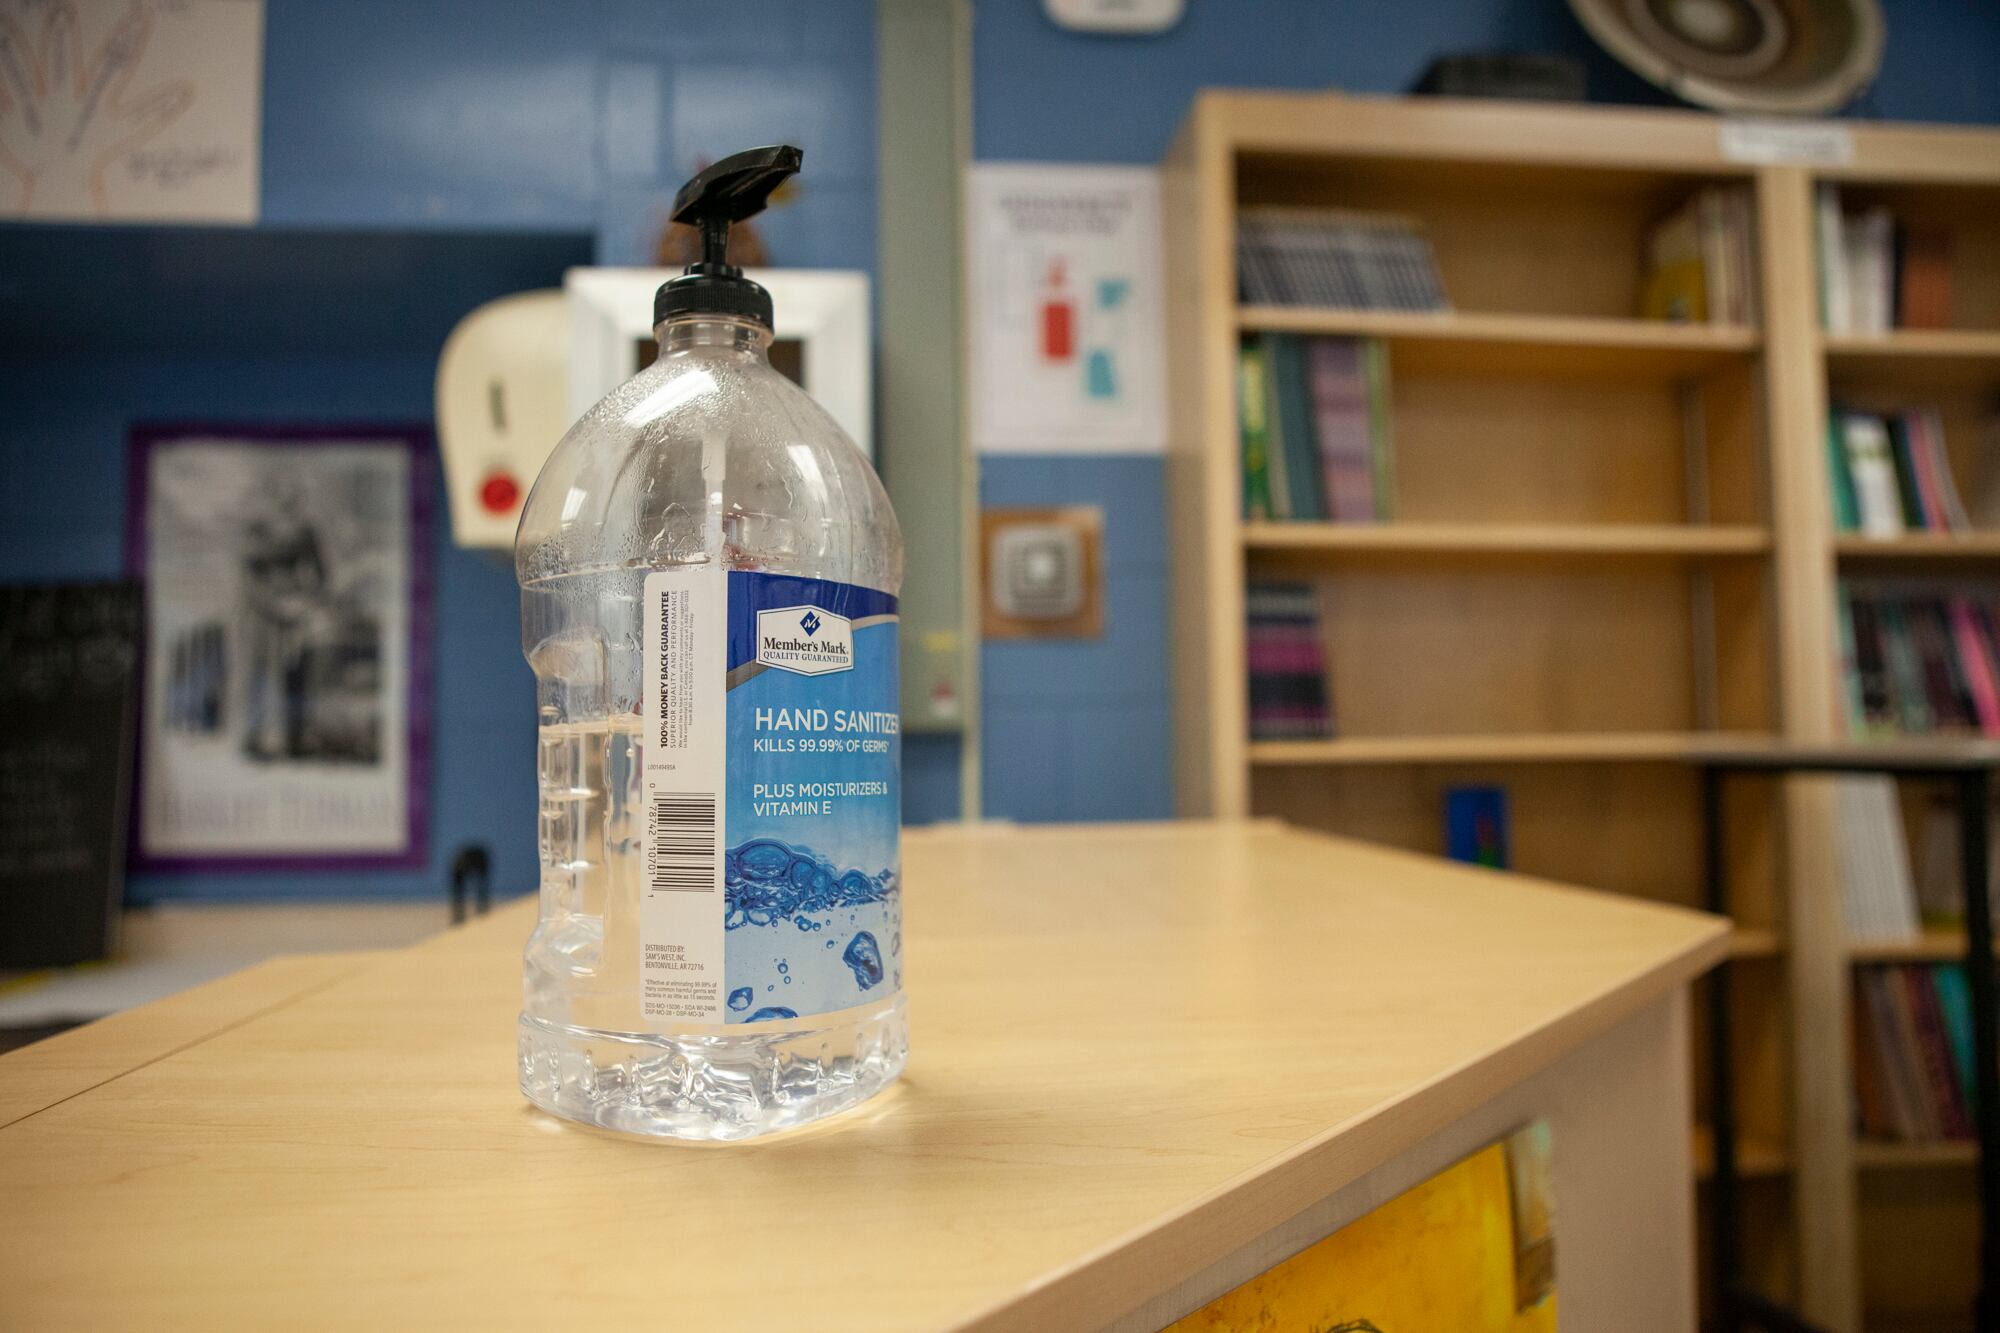 A bottle of hand sanitizer in a library.